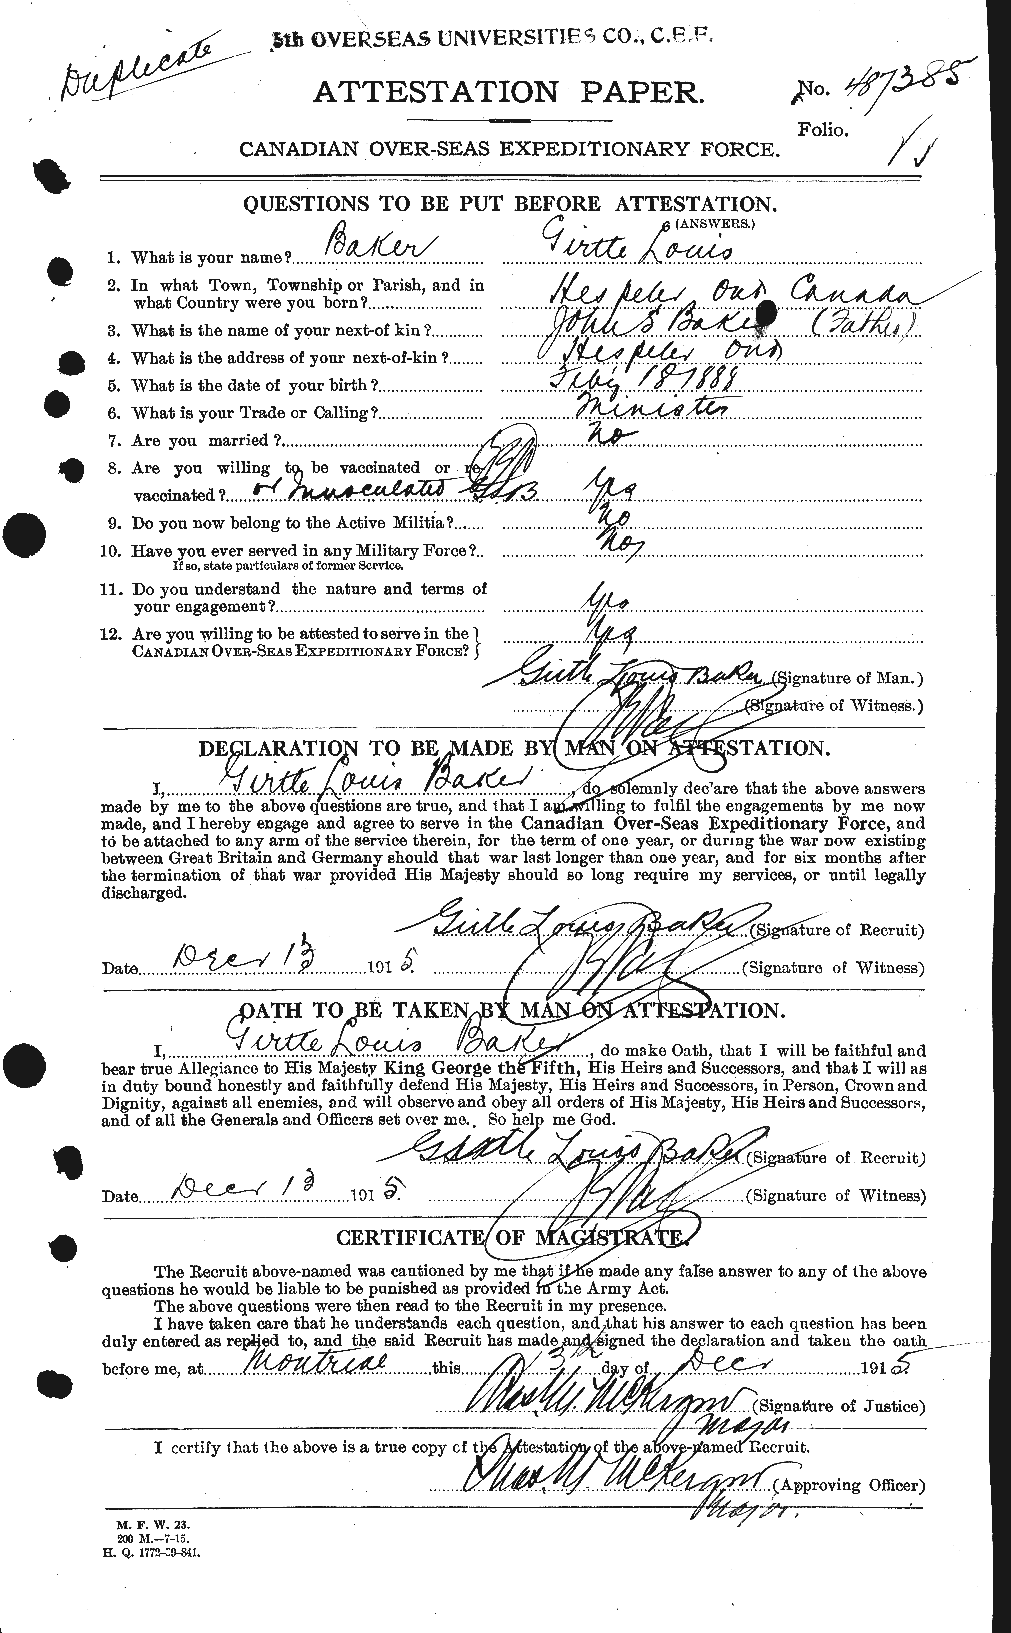 Personnel Records of the First World War - CEF 216206a